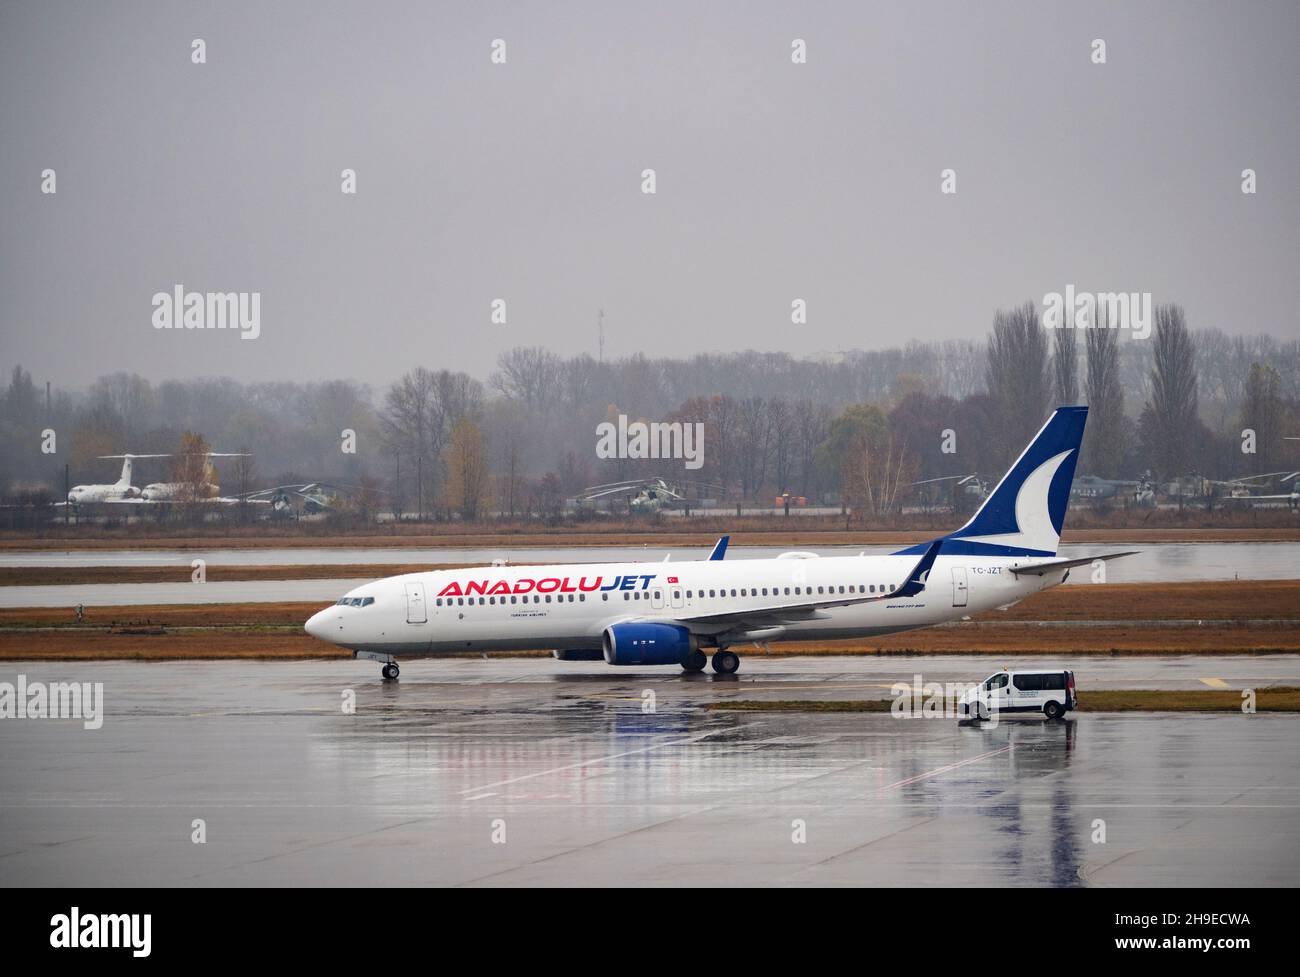 An Anadolu aircraft at Boryspil Airport. Since the beginning of 2021, Boryspil Airport has served more than 8 million passengers. Passenger traffic recovered by 71% compared to pre-crisis figures in October 2019 Stock Photo